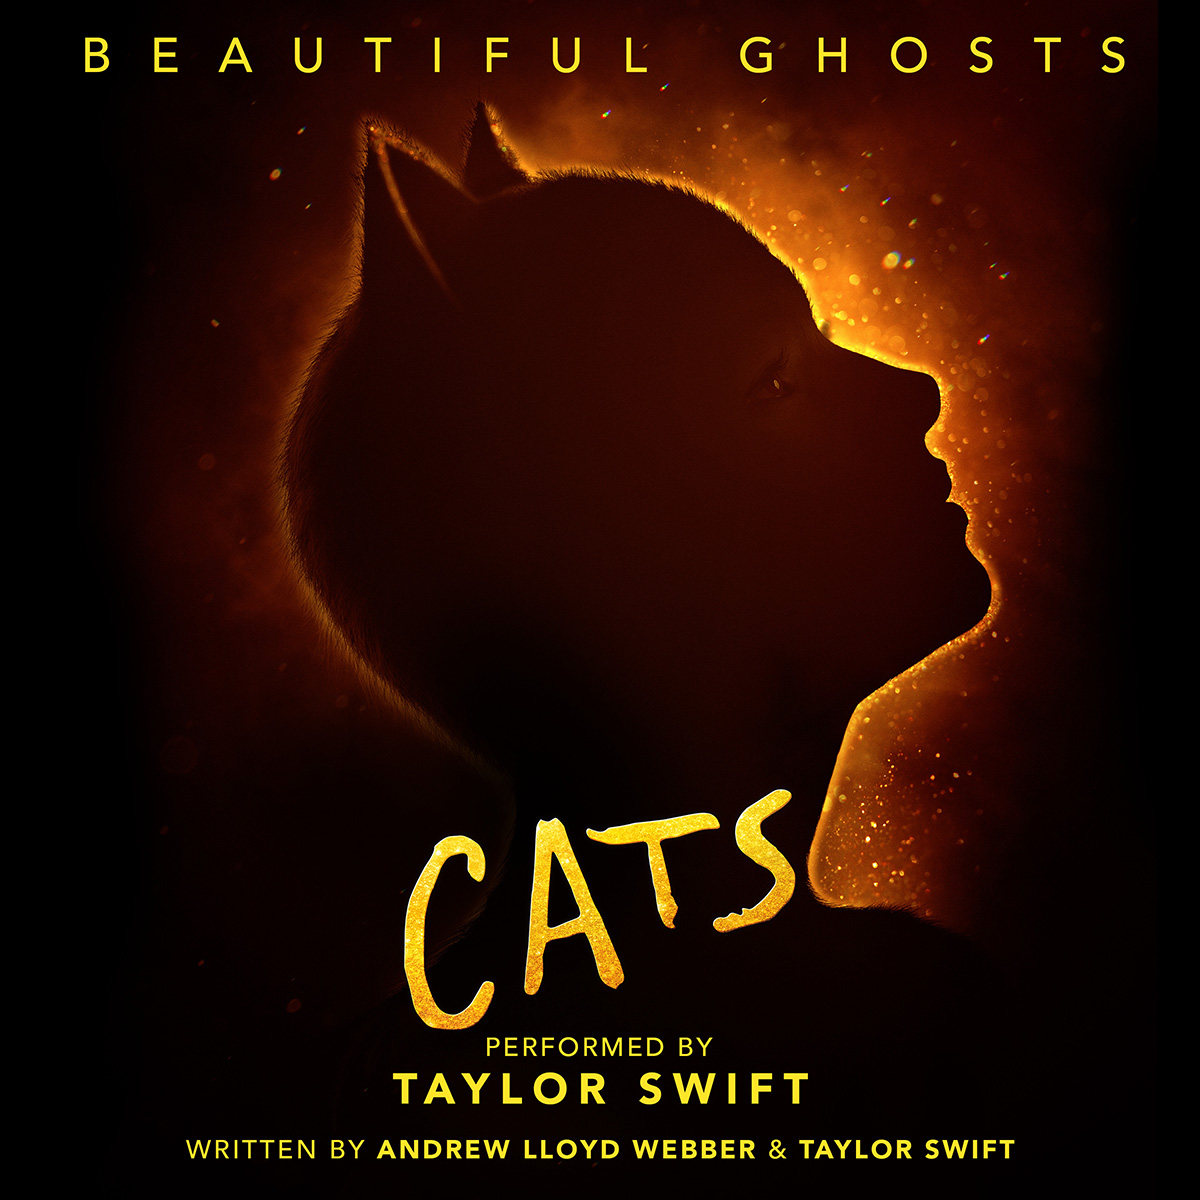 Taylor Swift - Beautiful Ghosts (From the Motion Picture Cats)